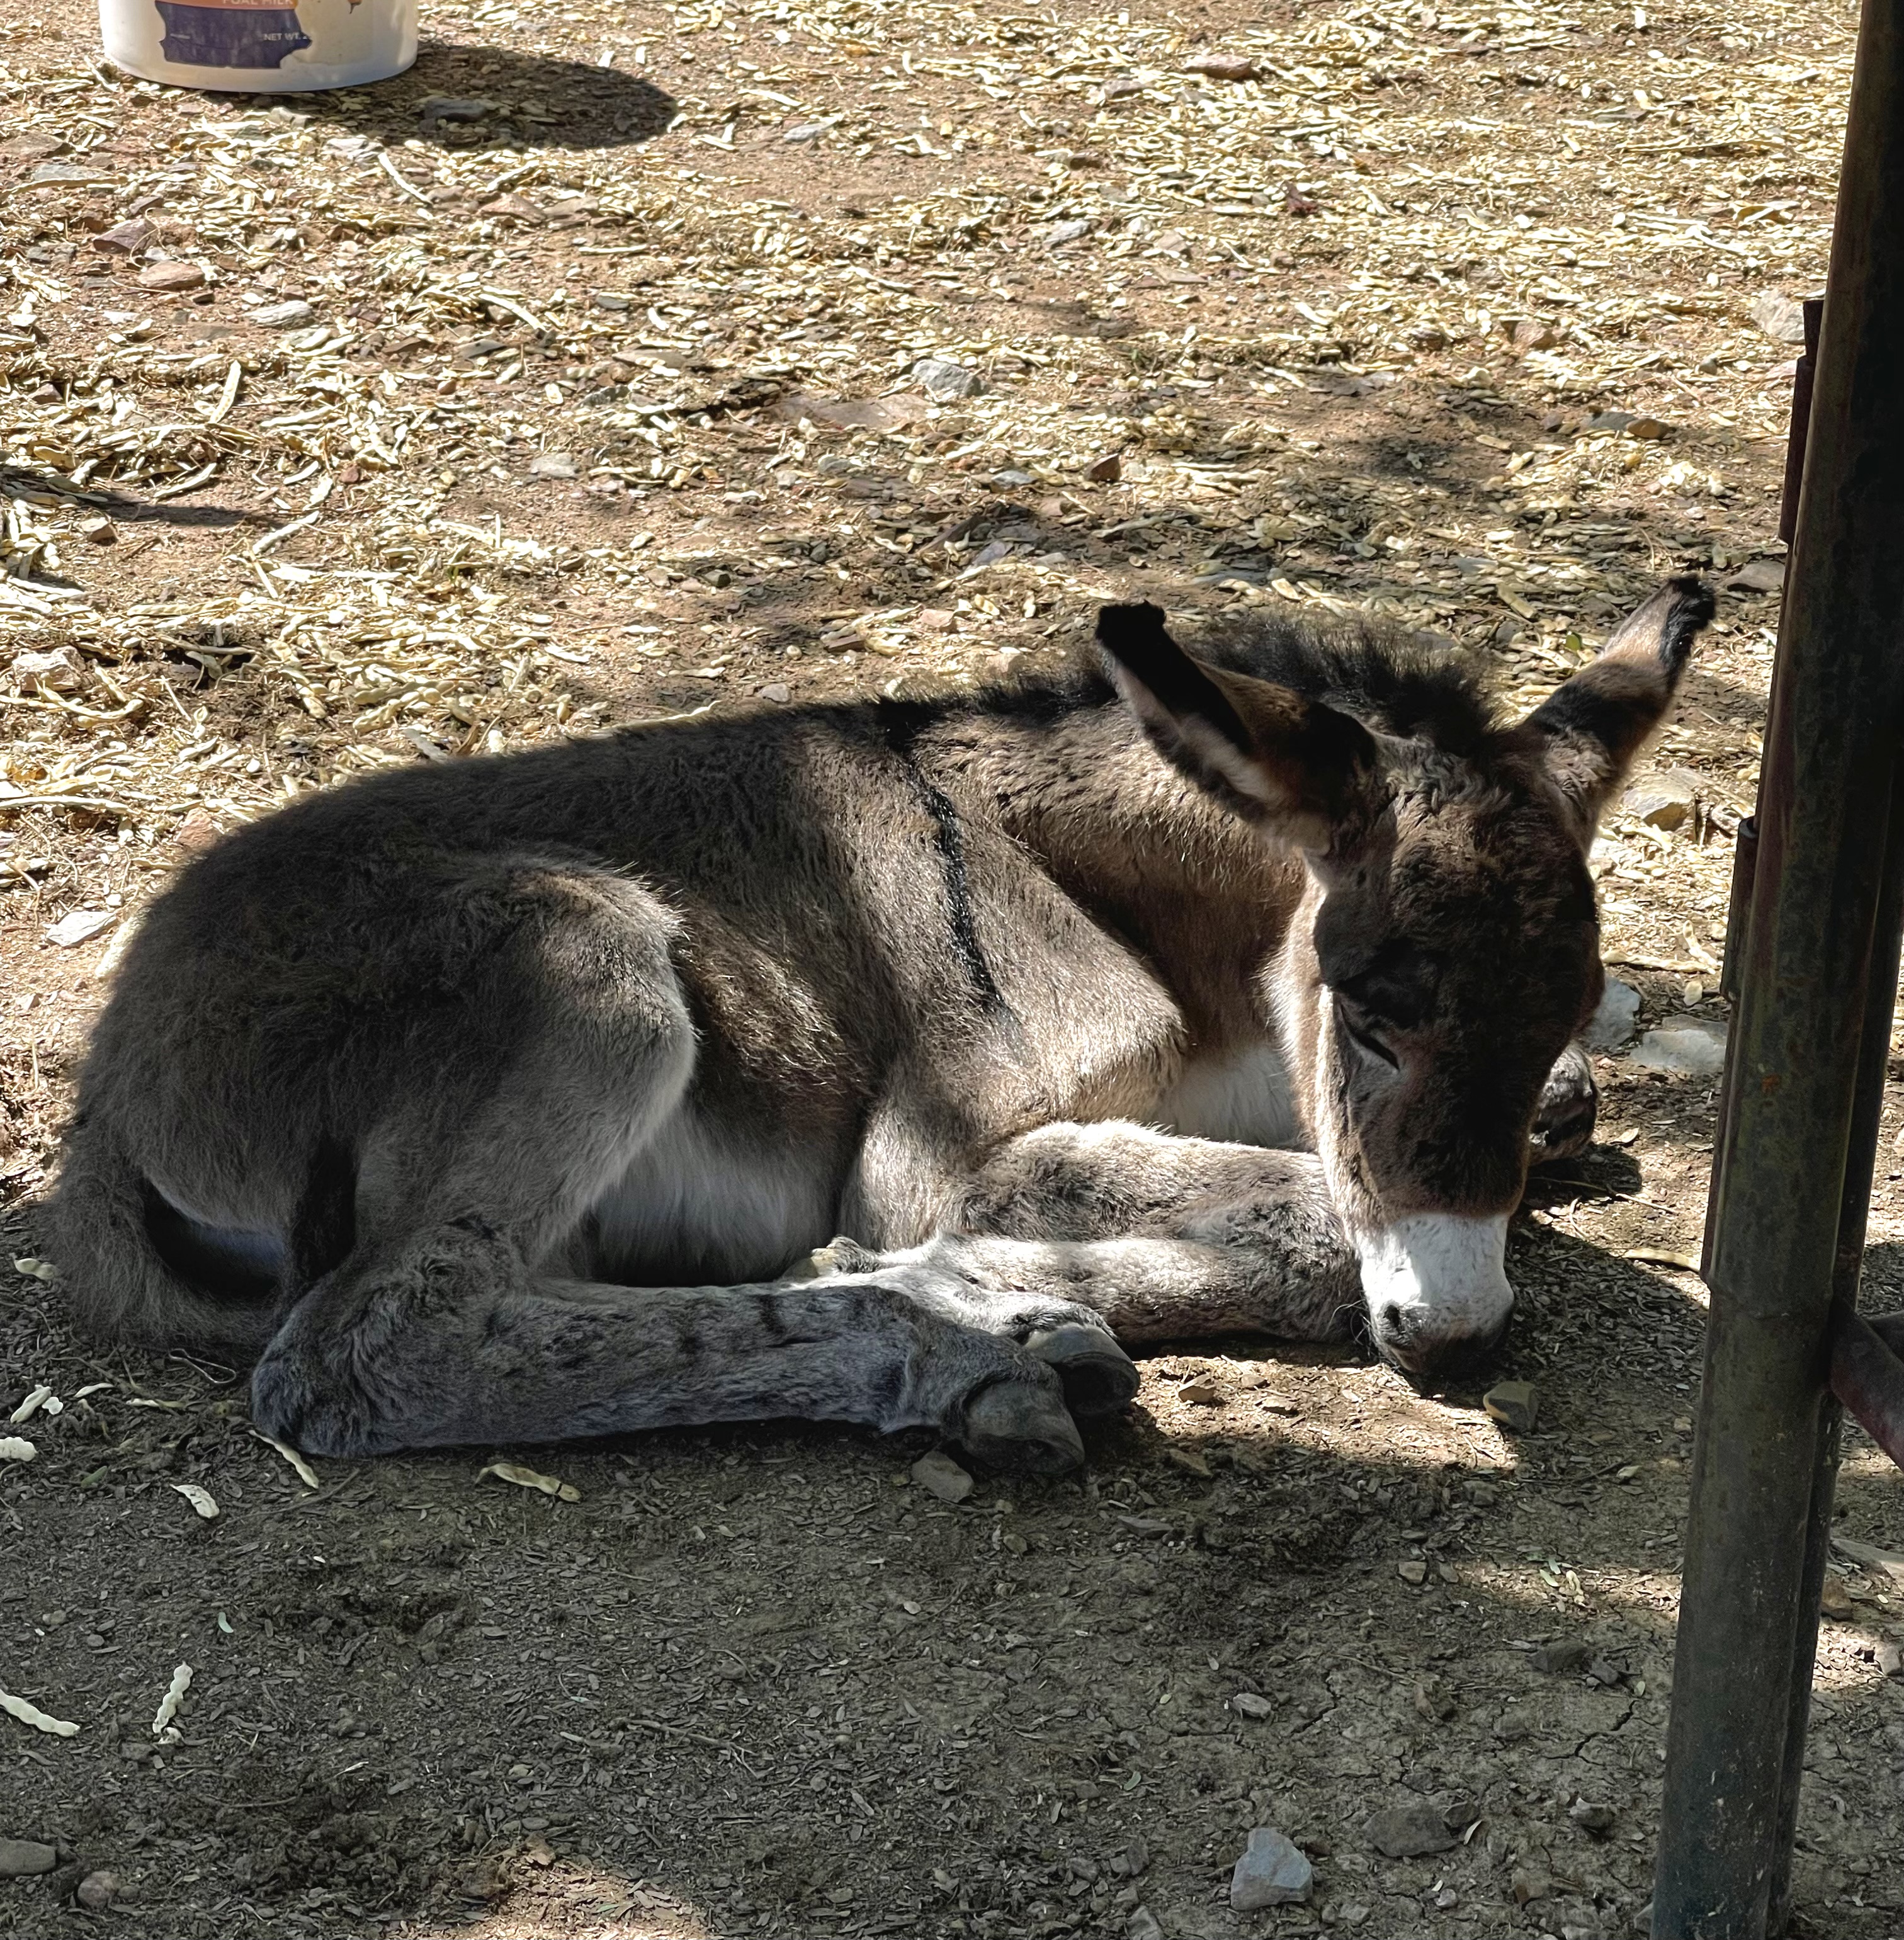 Baby burro "Roger" at the rescue